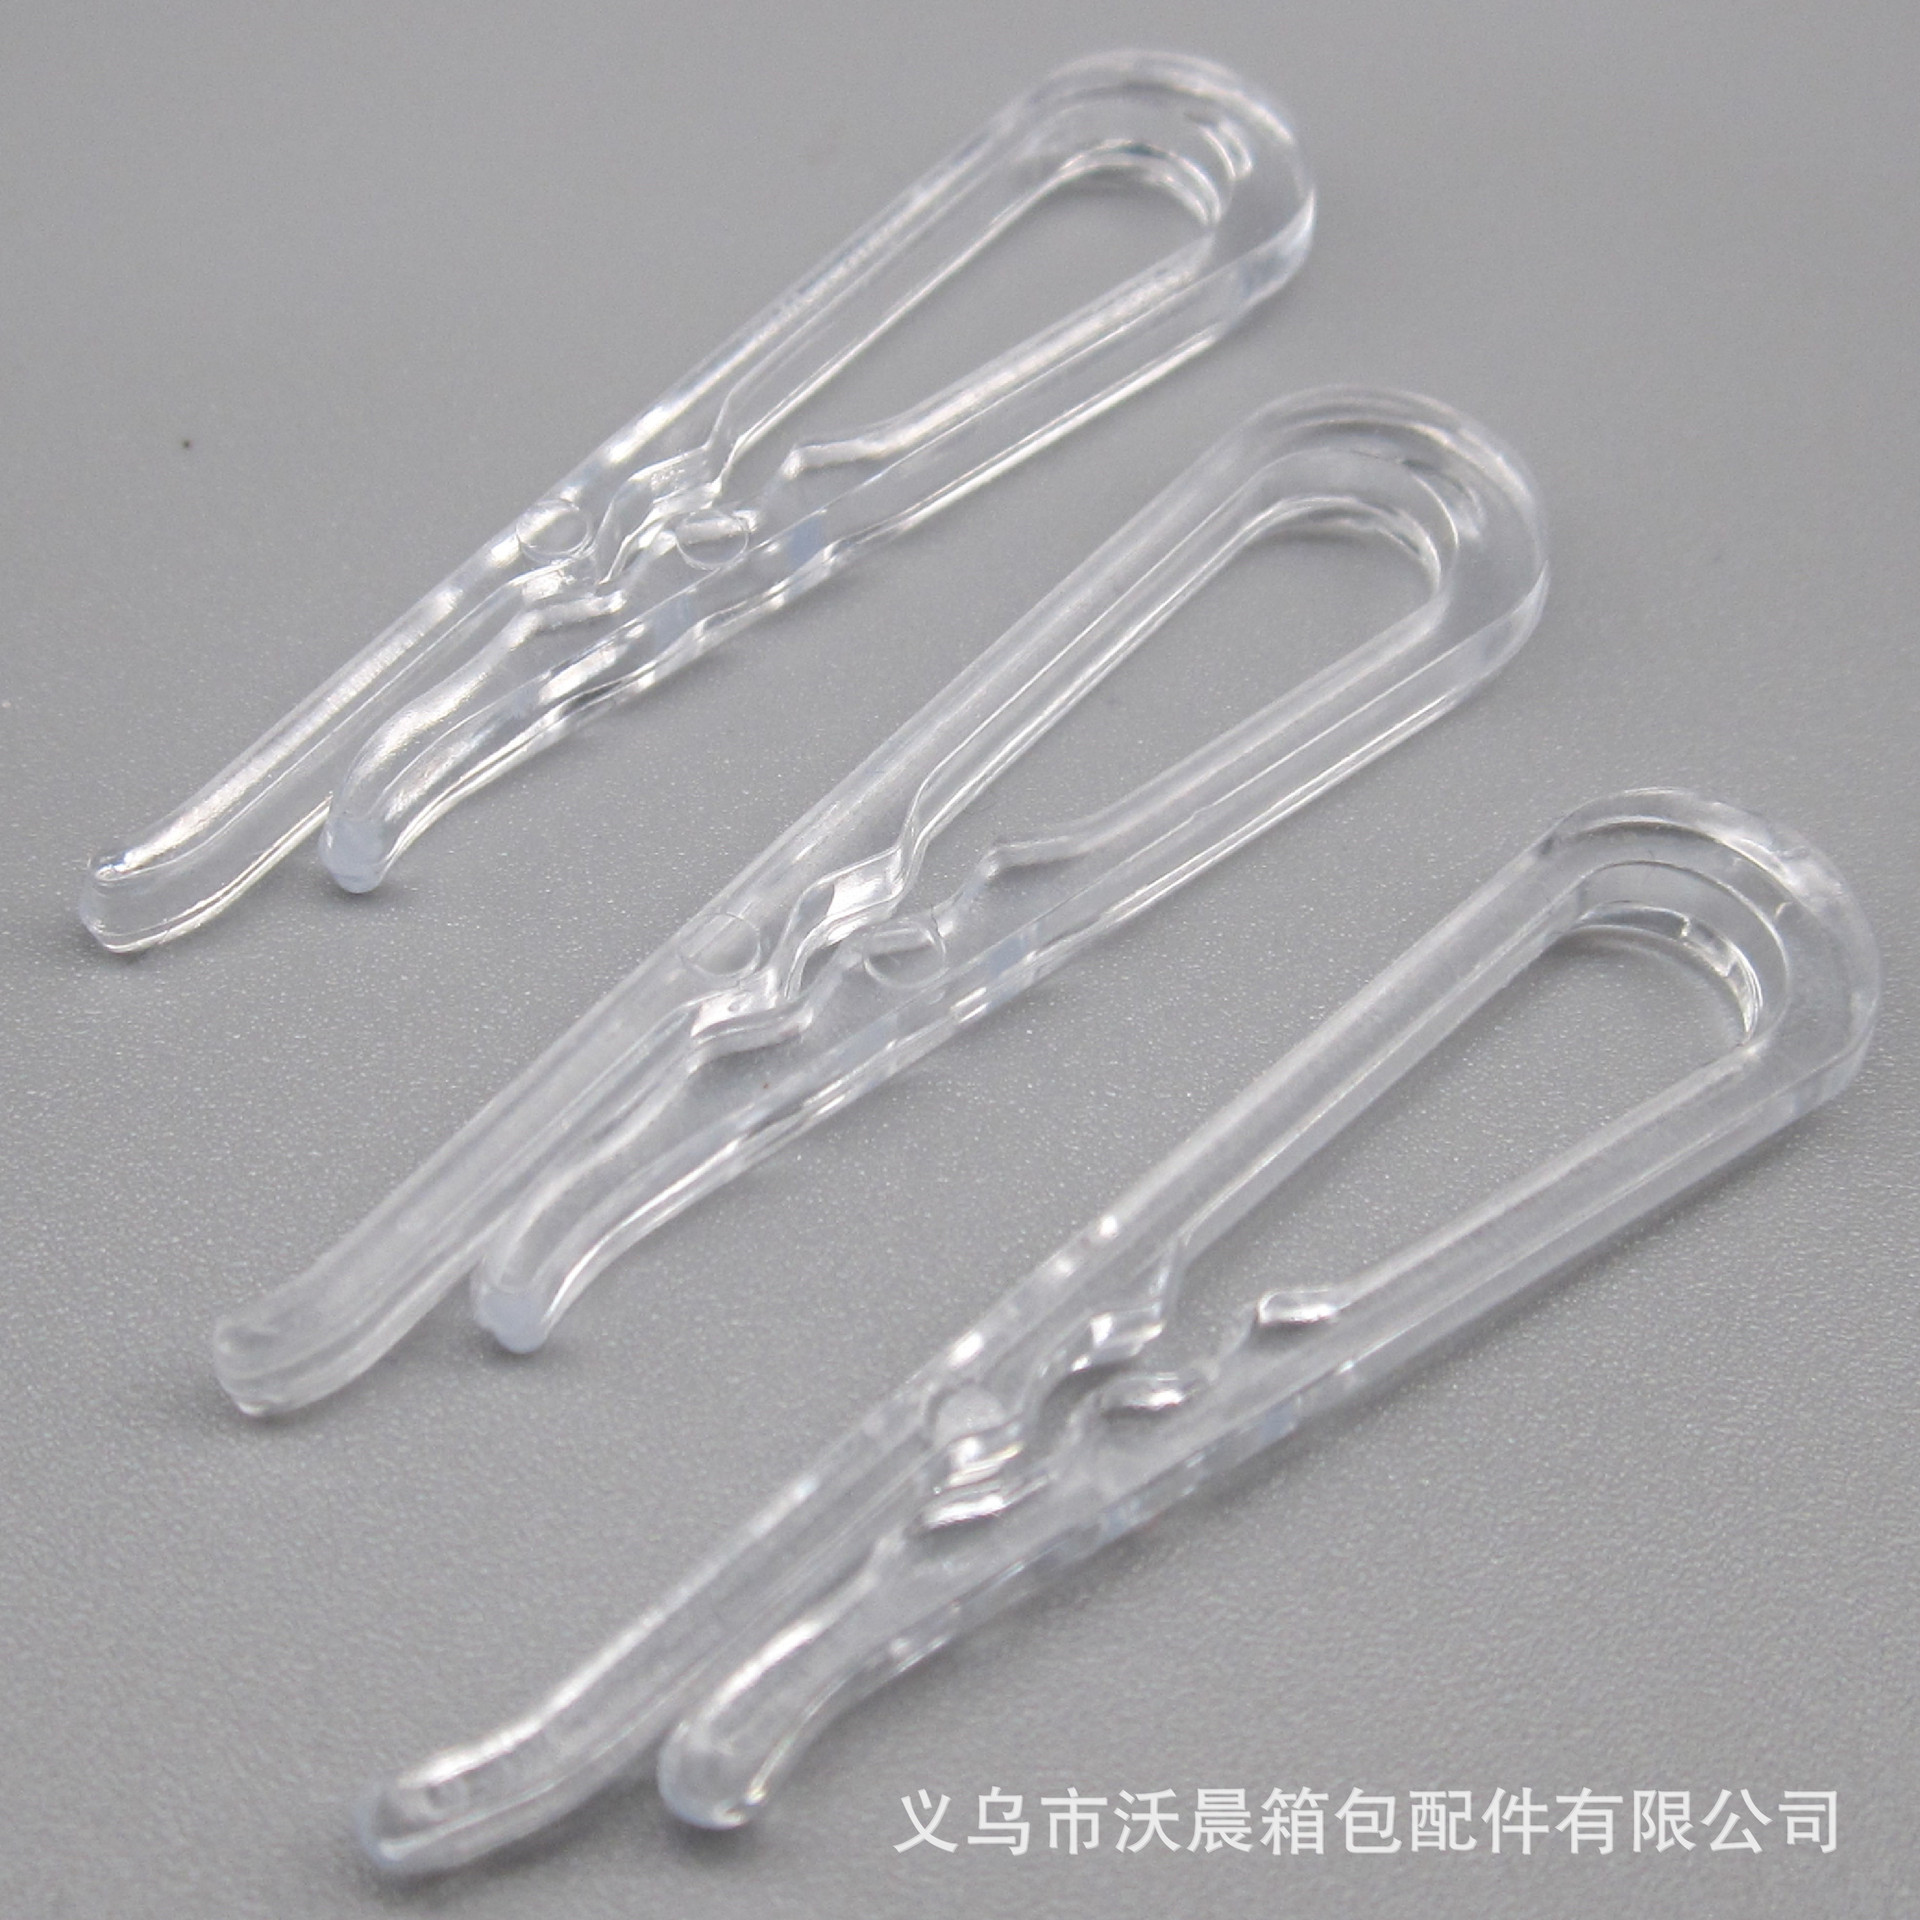 Factory Direct Sales Transparent Shirt Clip Collar Clip 5cm White Shirt Clip Large Quantity Can Be Discounted